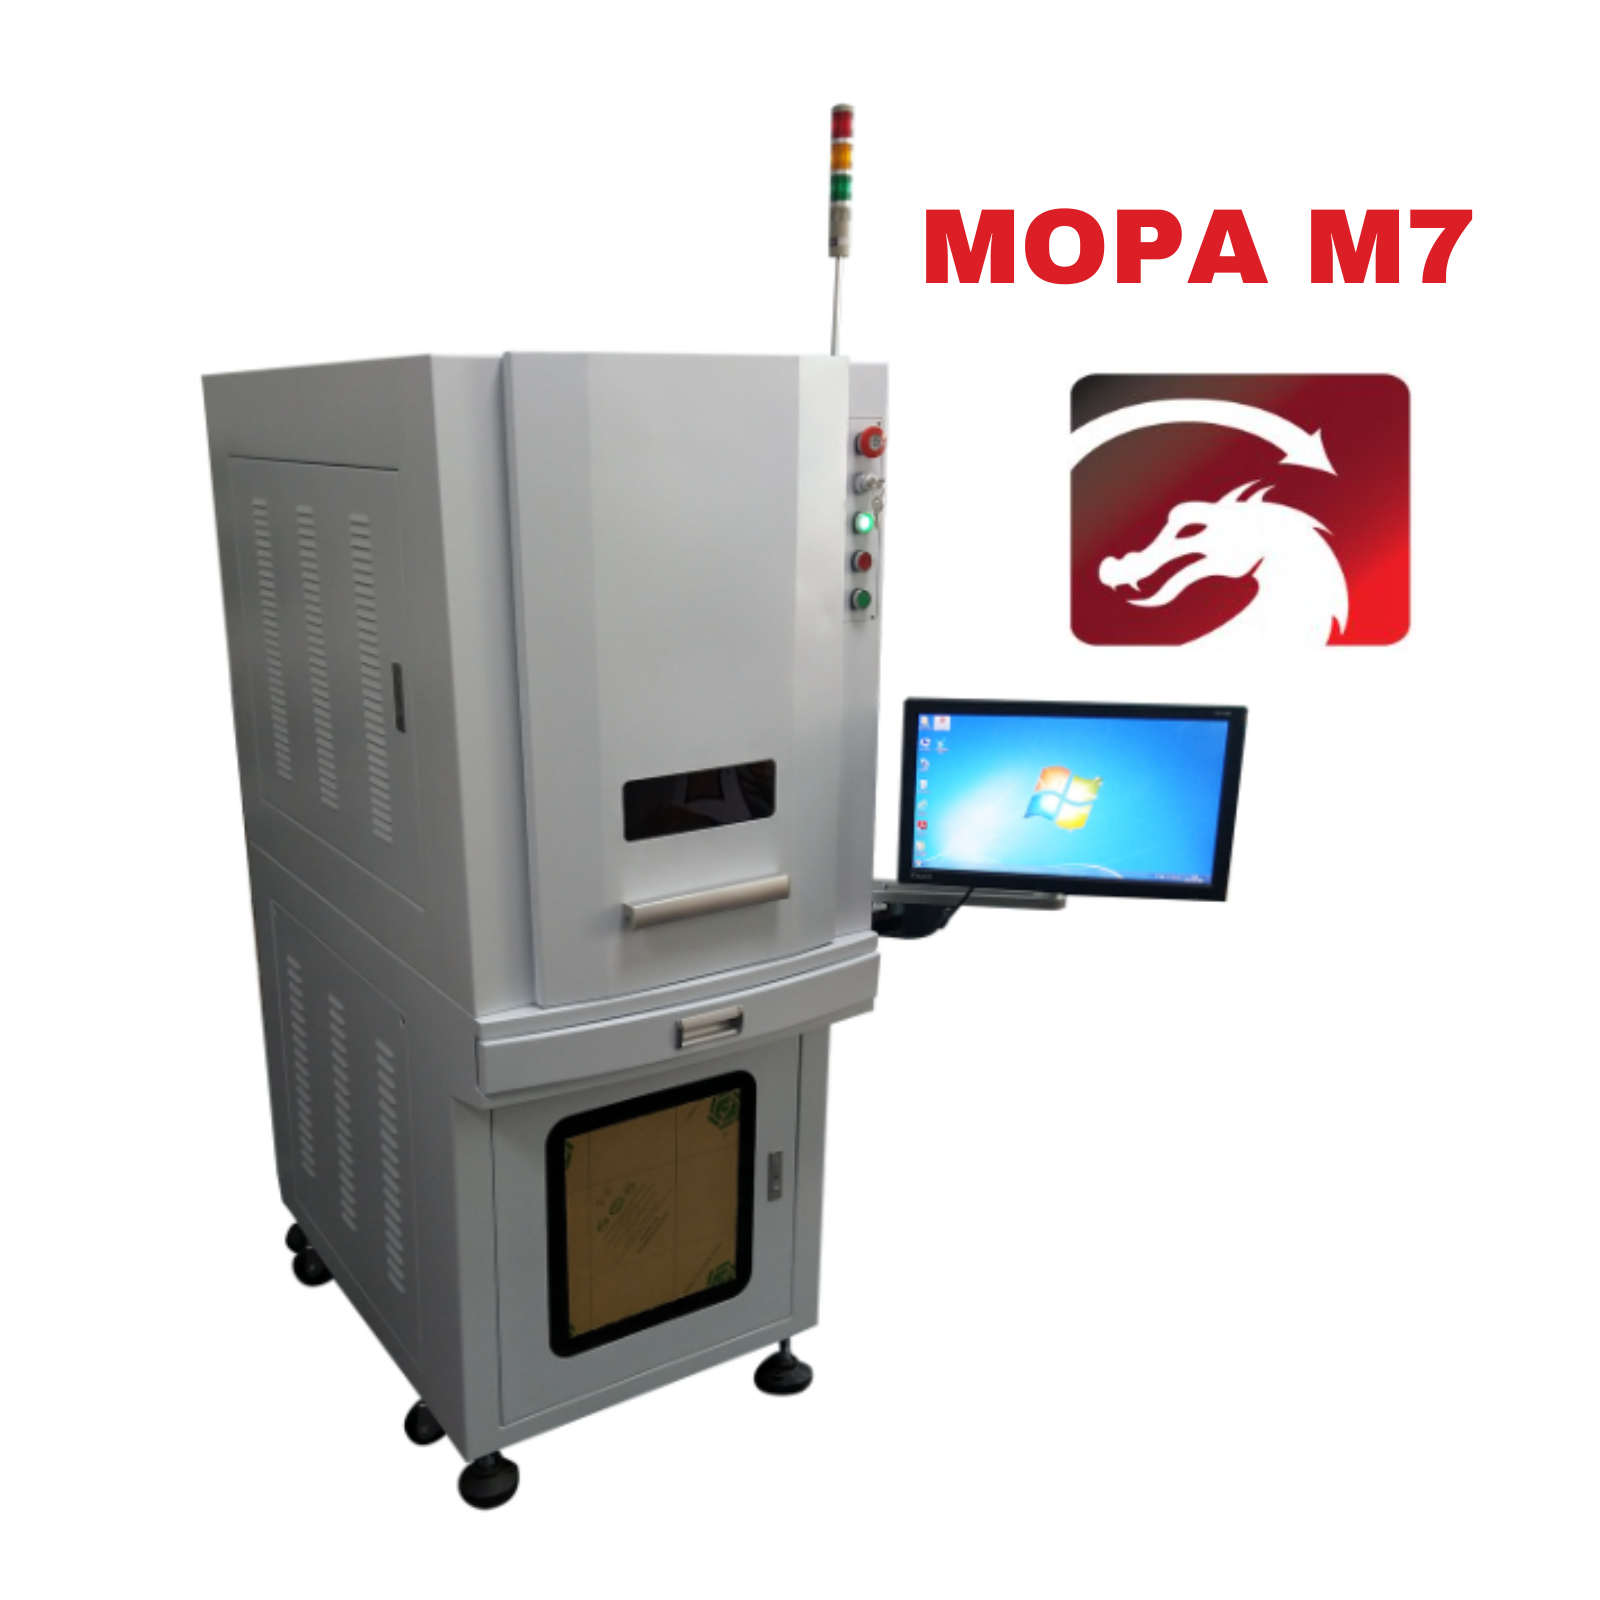 MCWlaser 60W/80W/100W MOPA M7 Enclosed & Cabinet B Type Fiber Laser Engraver Fiber Marking Machine  With 8.7” X 8.7"Working Area & D80 Rotary Axis